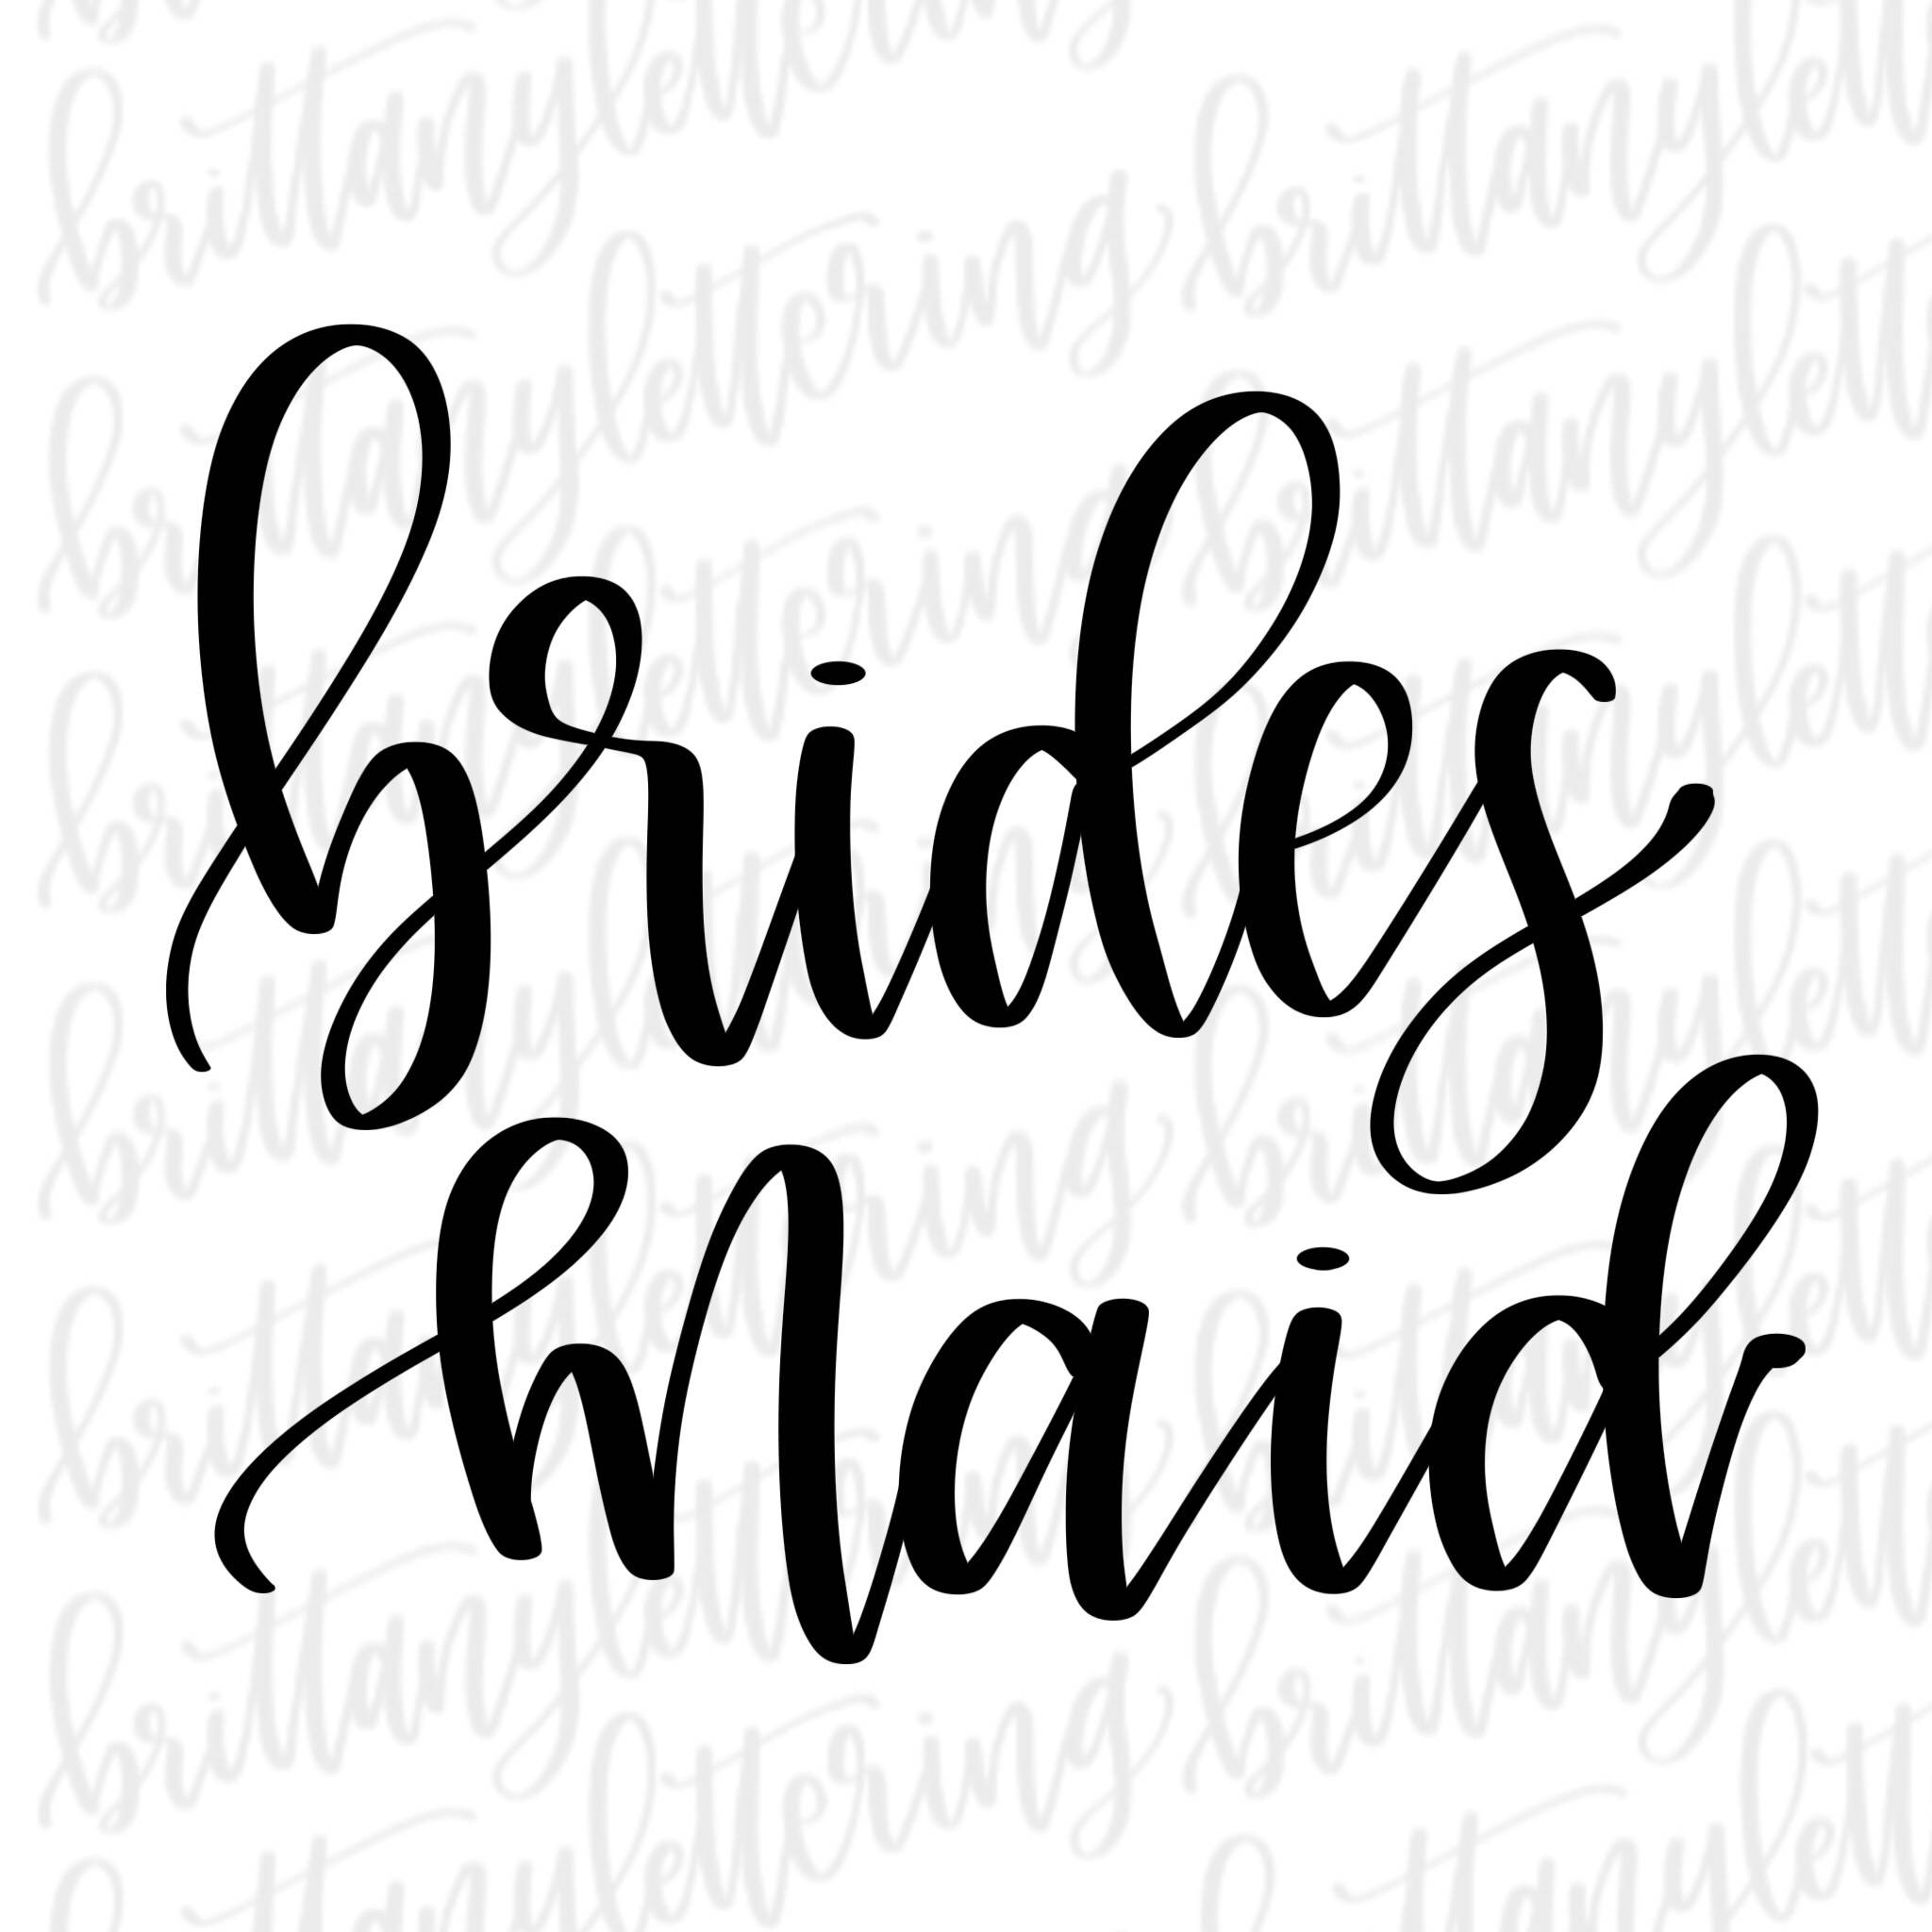 Collection of Bridesmaid clipart